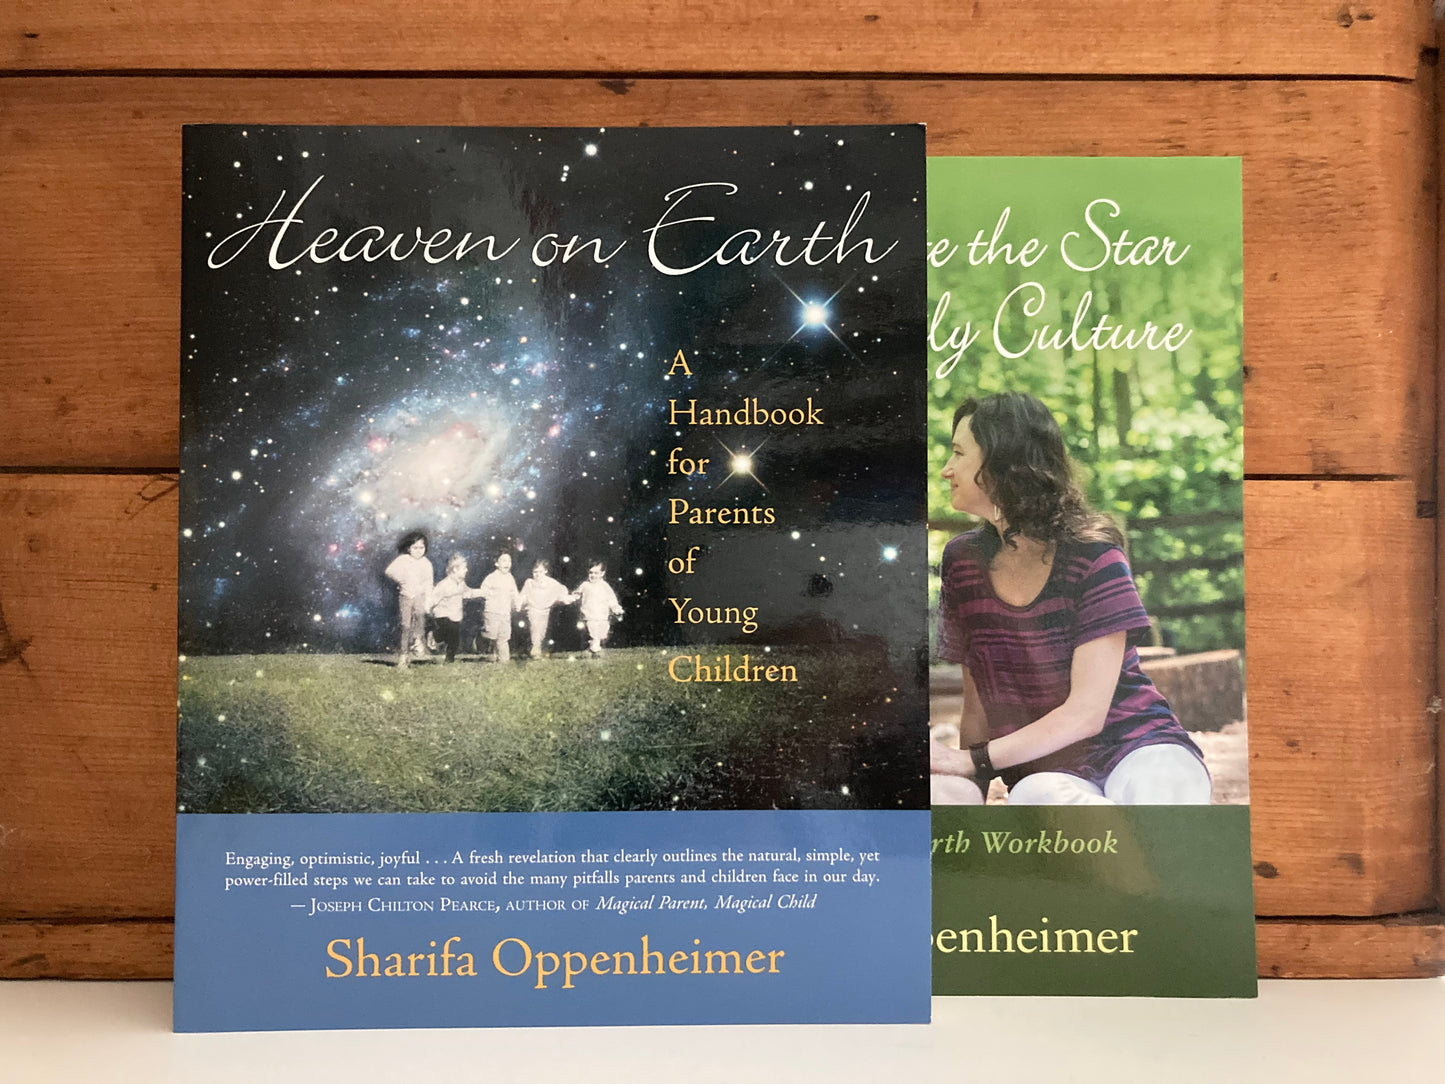 Parenting Resource Books - HEAVEN ON EARTH, and HOW TO CREATE THE STAR OF YOUR FAMILY CULTURE